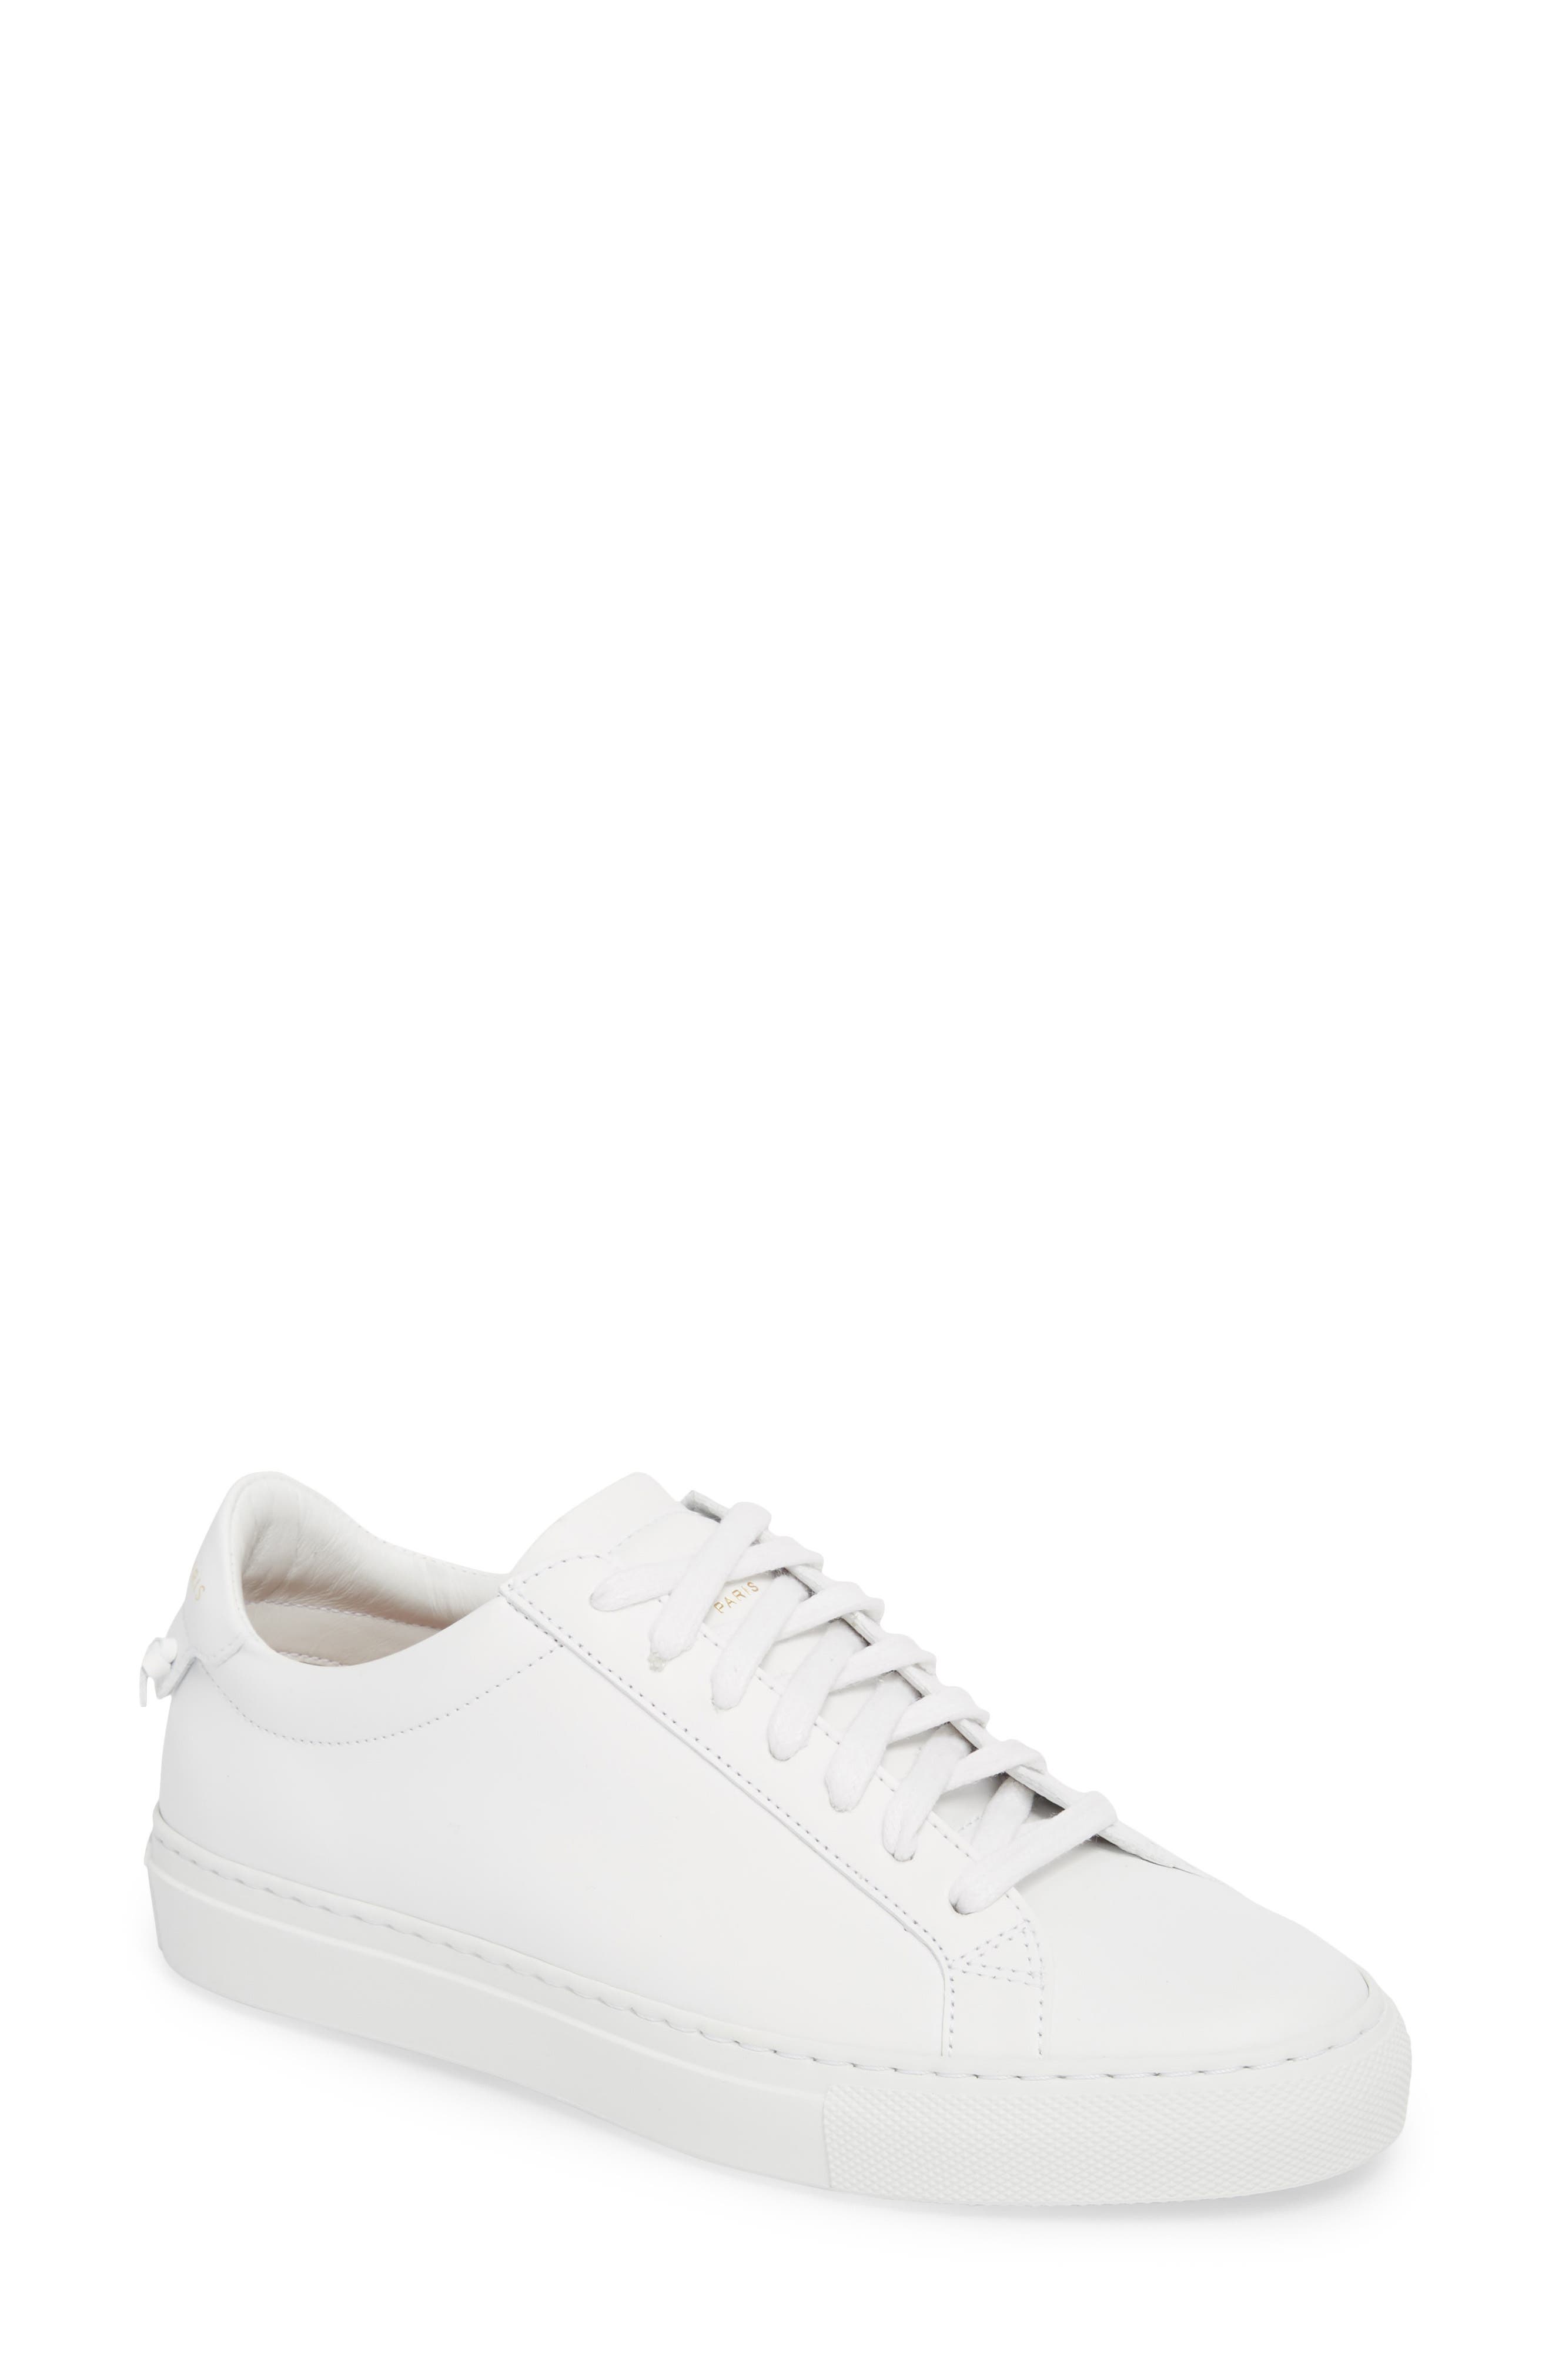 Givenchy Low Top Sneaker In Optic White 